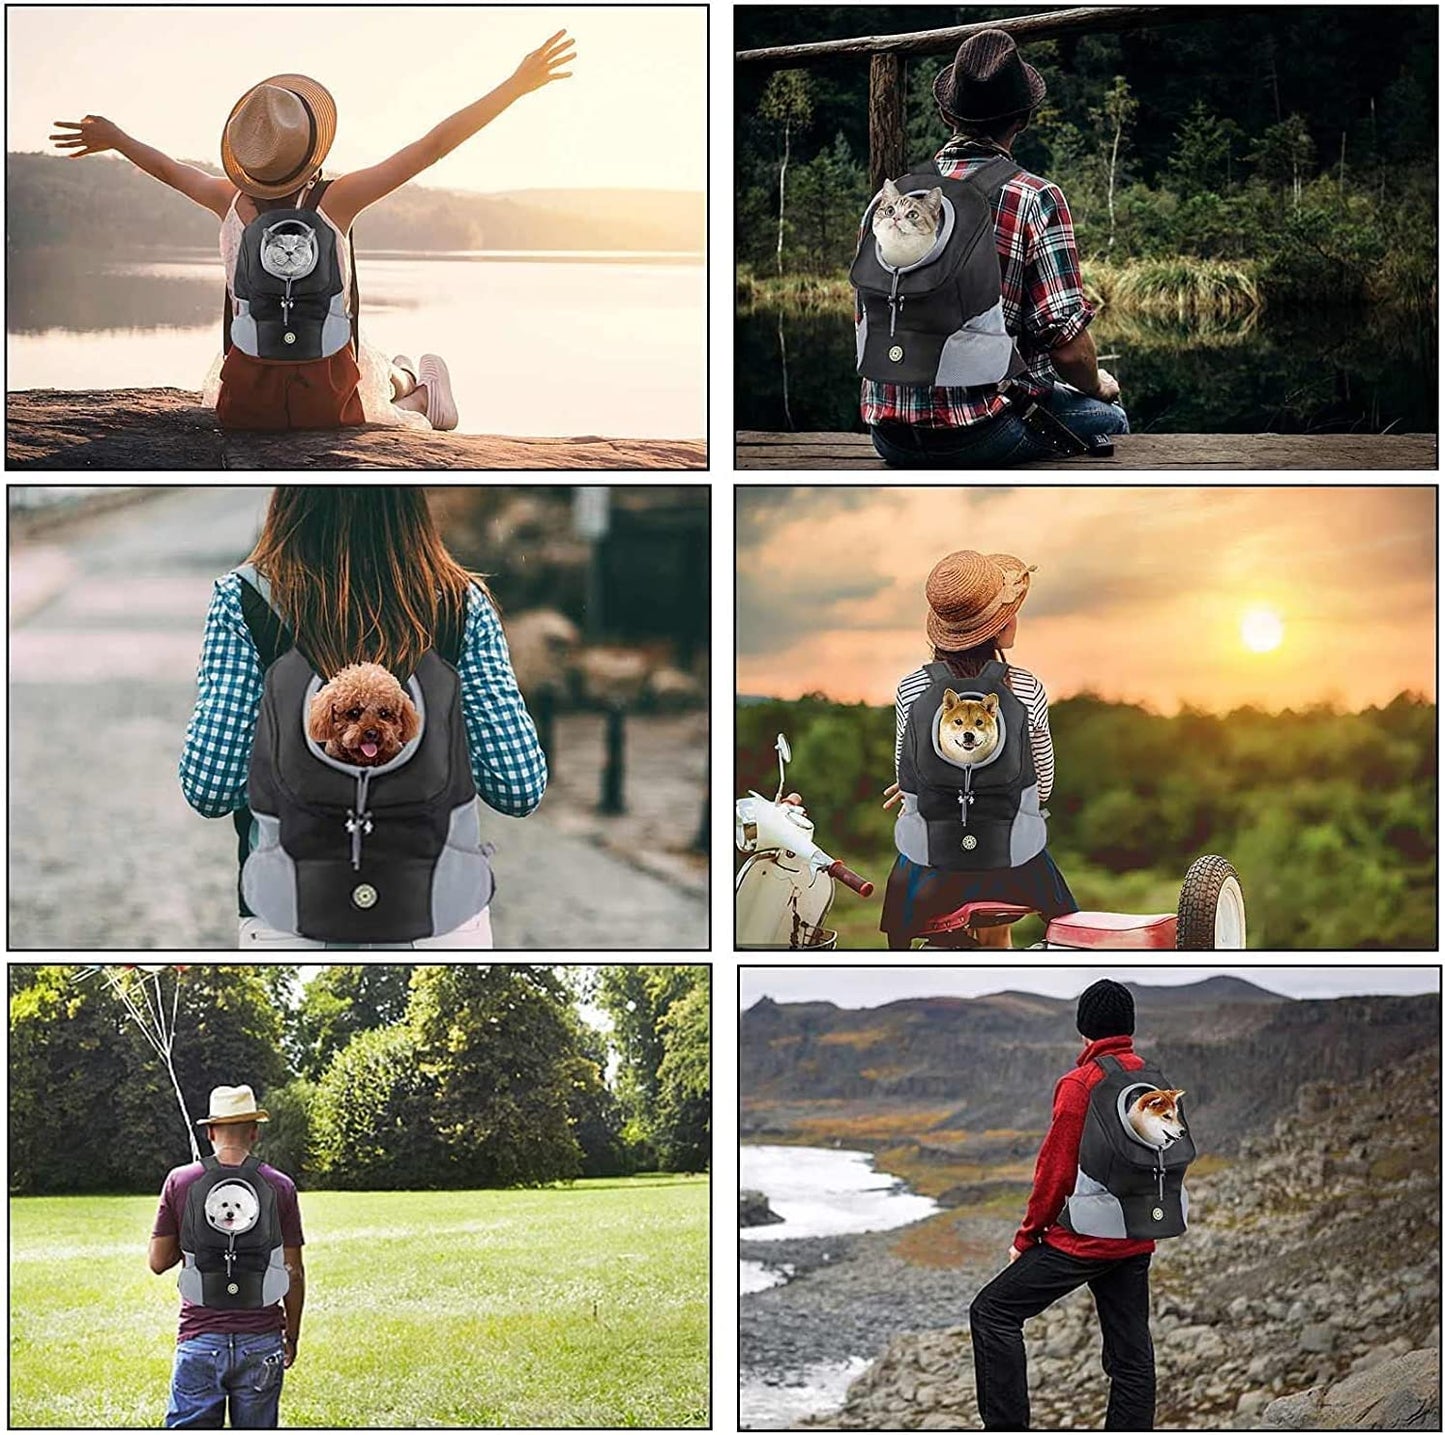 Dog Backpack, Puppy Backpack, Pet Carrier Backpack Small Dog Backpack Carrier Pet Travel Carrier Dog Front Carrier with Breathable Head Out Design and Padded Shoulder for Hiking Outdoor Travel(S)